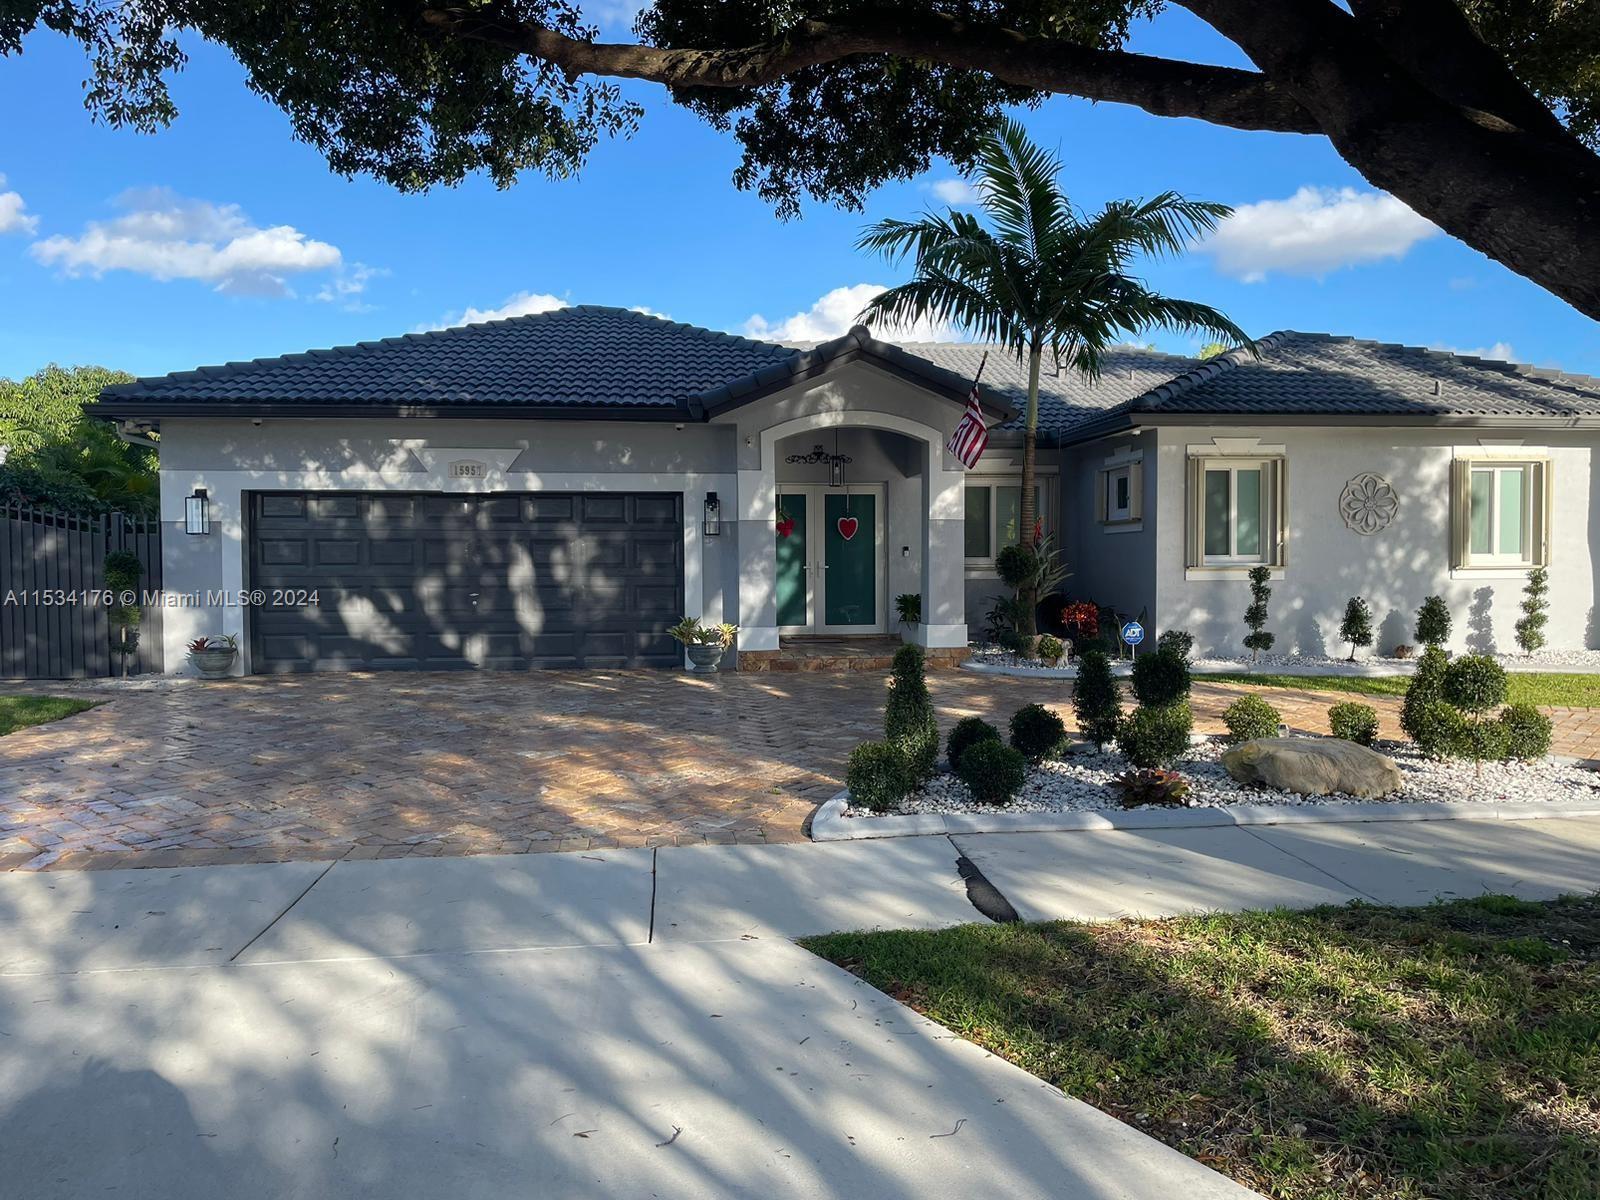 Beautiful house in Miami Lakes, nice travertine circular driveway, brand new approaches, fully gutte